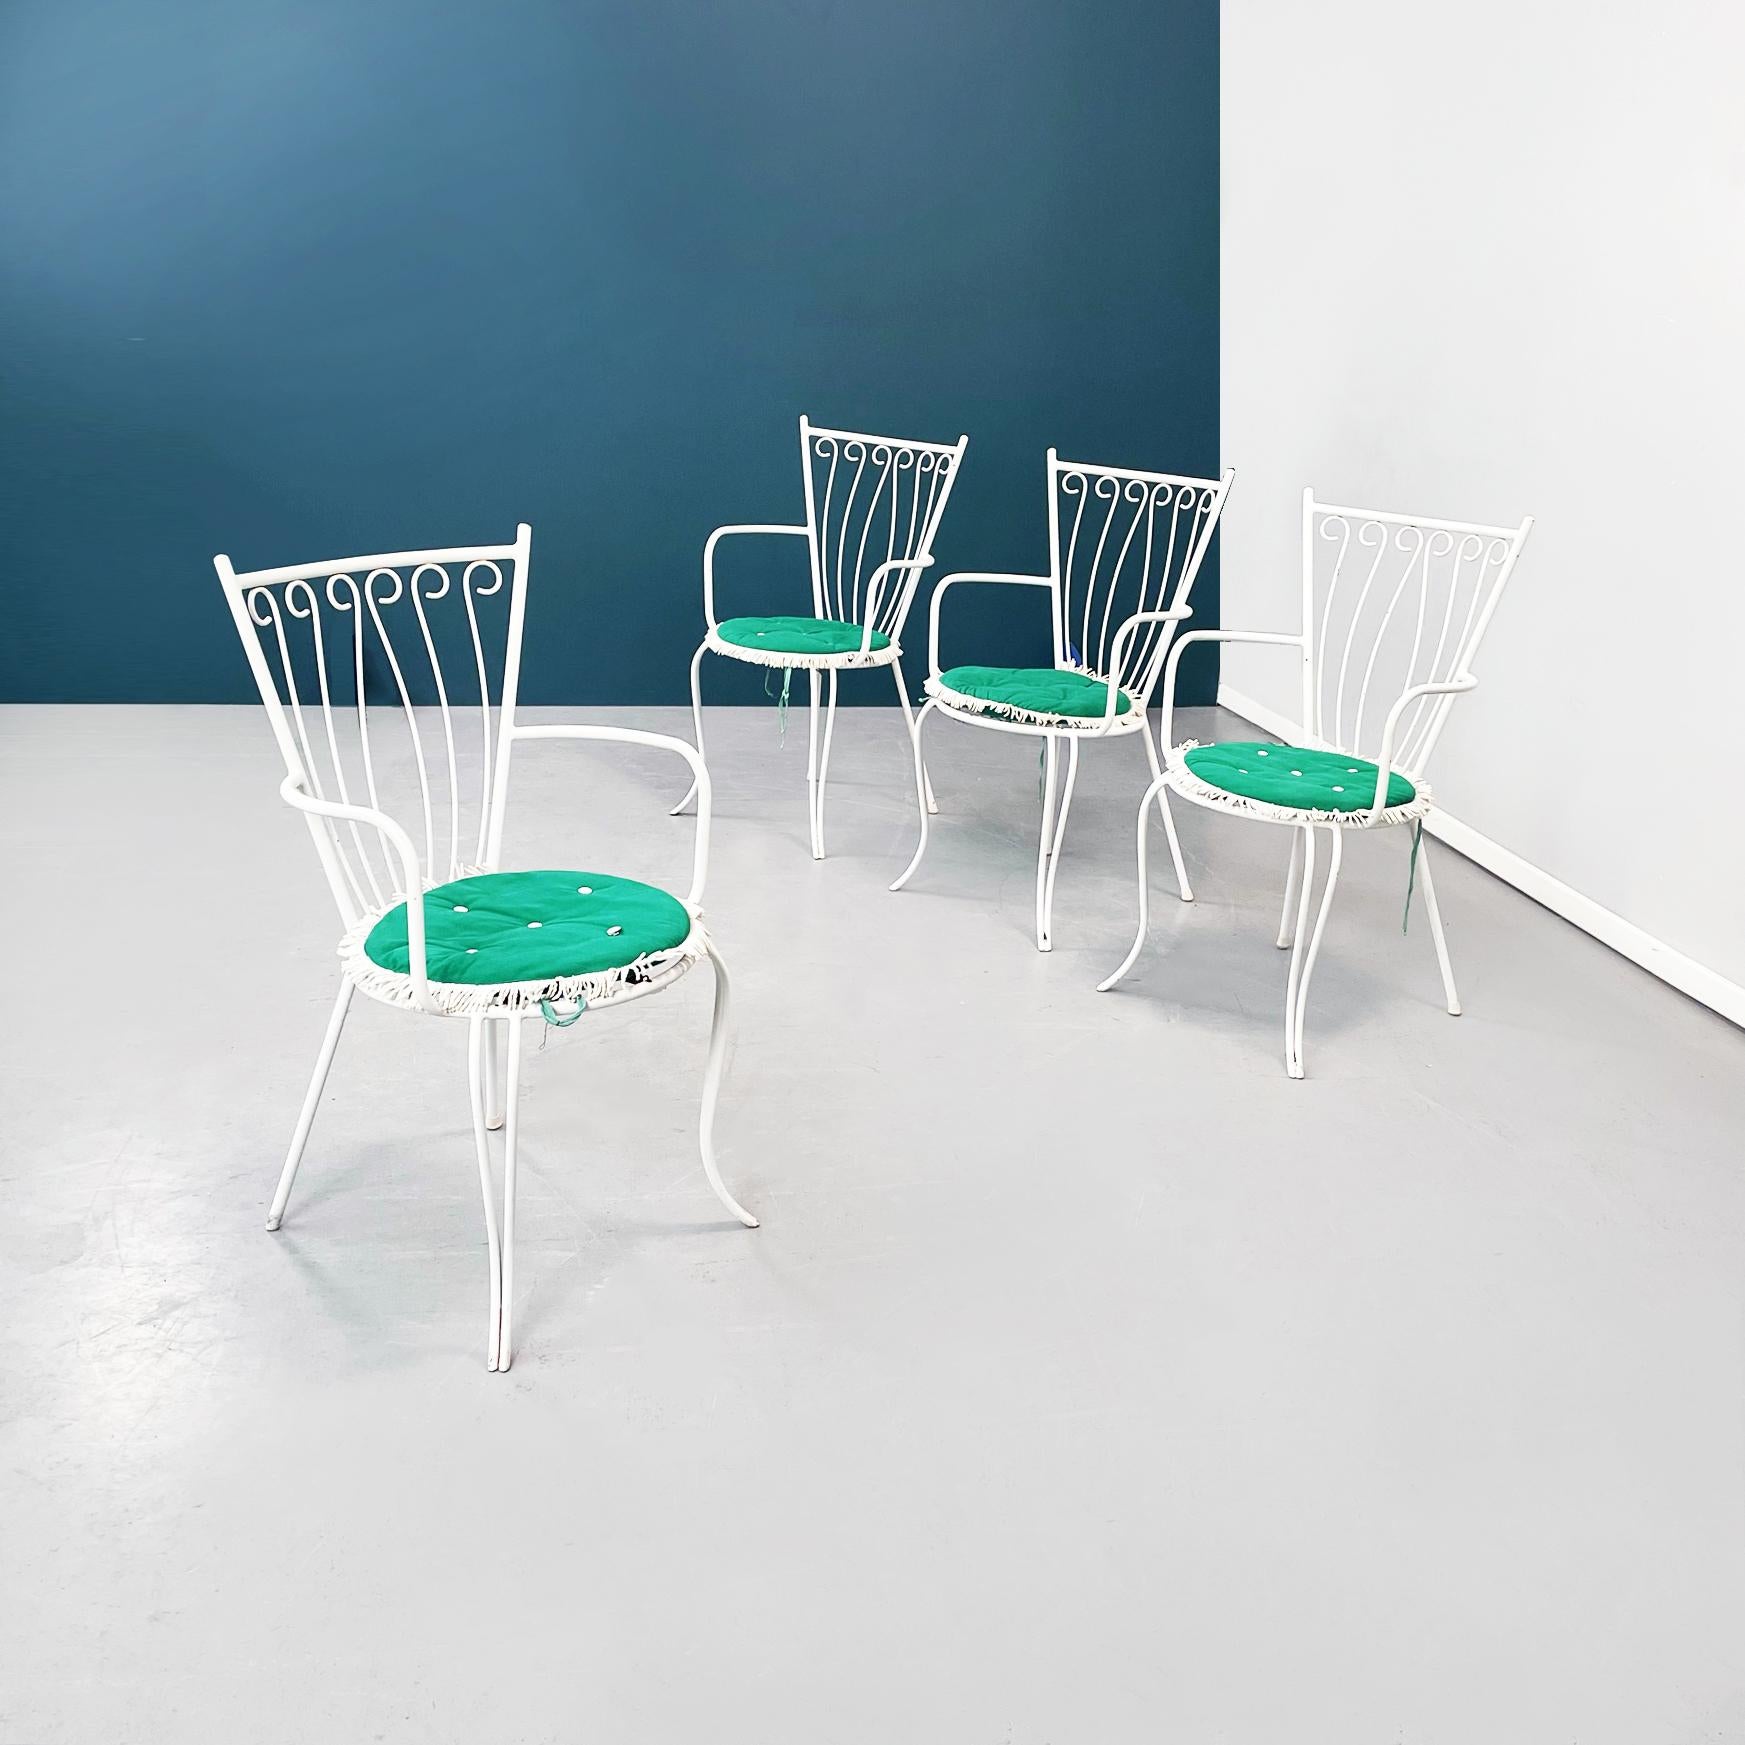 Italian mid-century Garden chairs table in white iron, glass and fabric, 1960s.
Garden set consisting of 4 chairs and a table. The outdoor chairs are in white painted wrought iron. The round seat is made up of a series of springs on which a padded